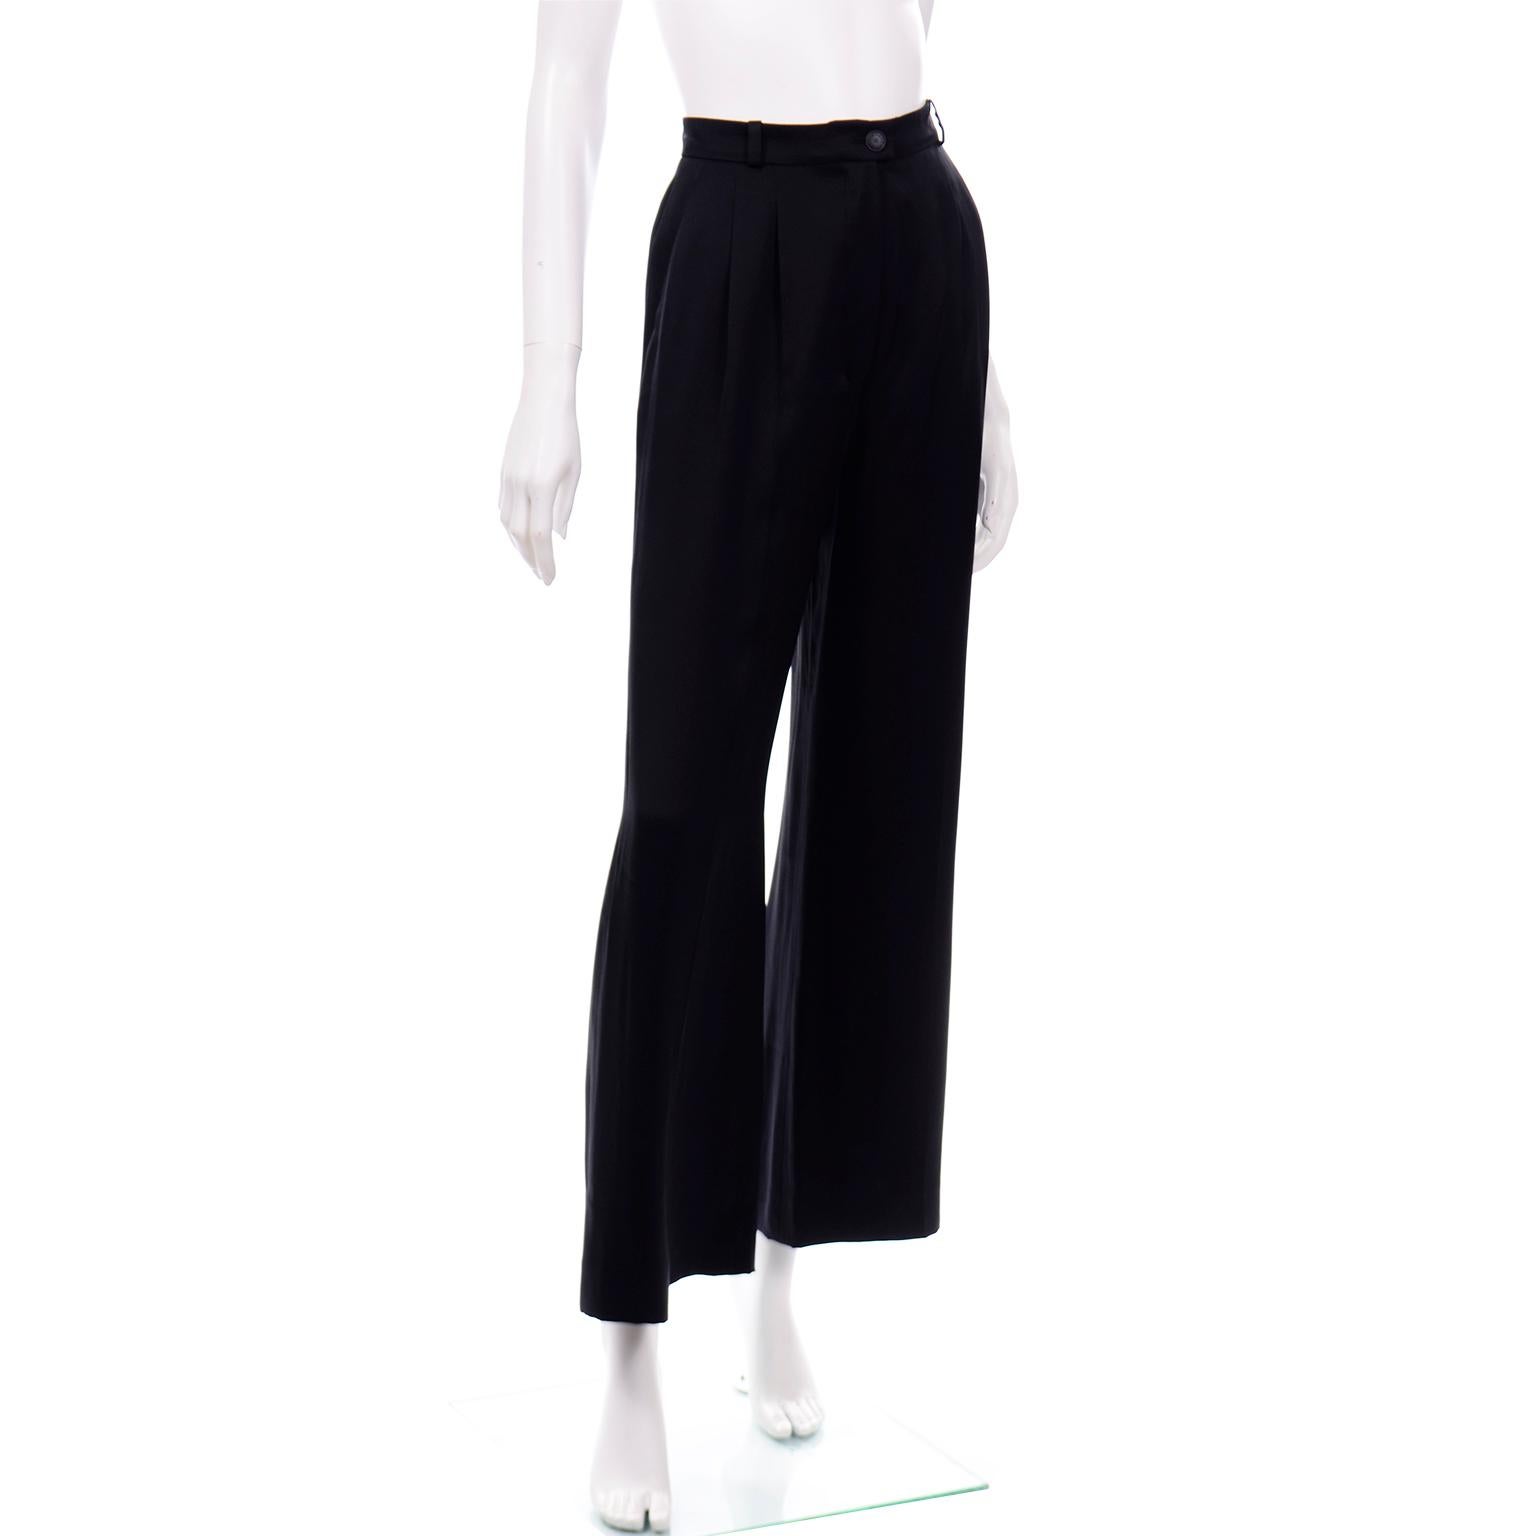 These are really elegant black silk Chanel pants from the Spring 2002 collection. The pants are high waisted and have two pleats on the front and a center fold down the leg. The waistband really slim and has small belt loops and a center CC monogram